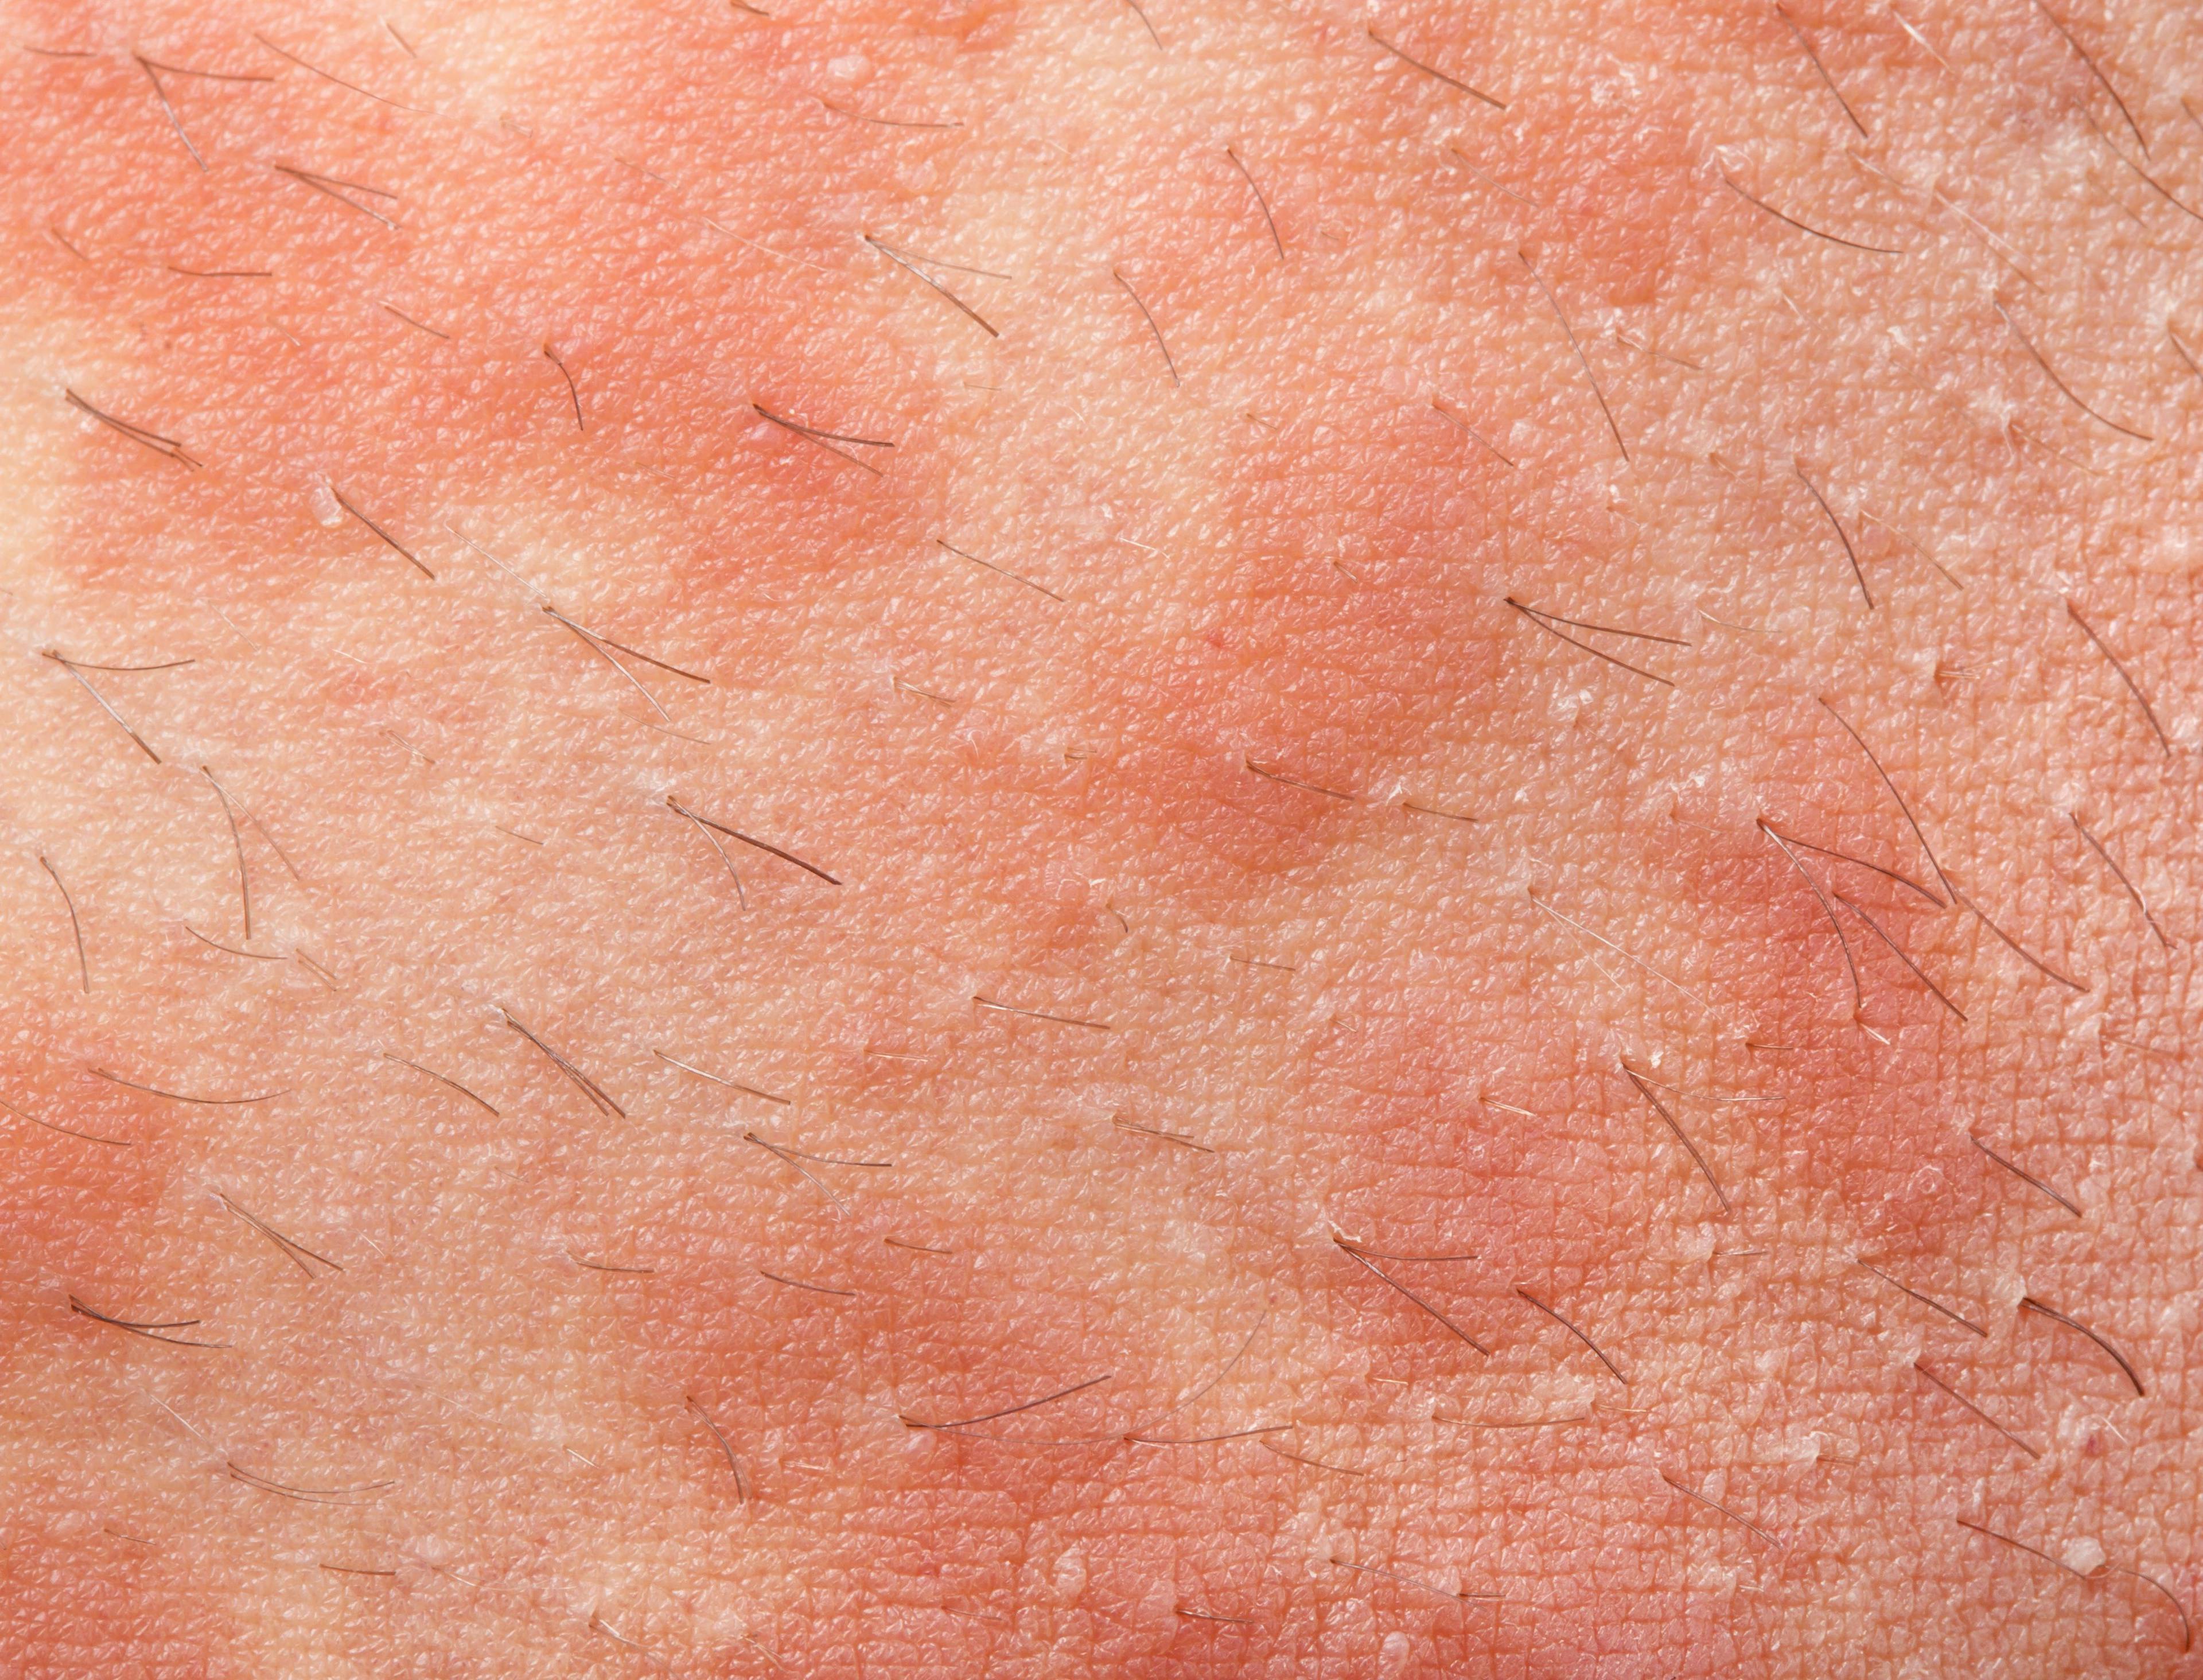 Upadacitinib Approved in EU for Atopic Dermatitis